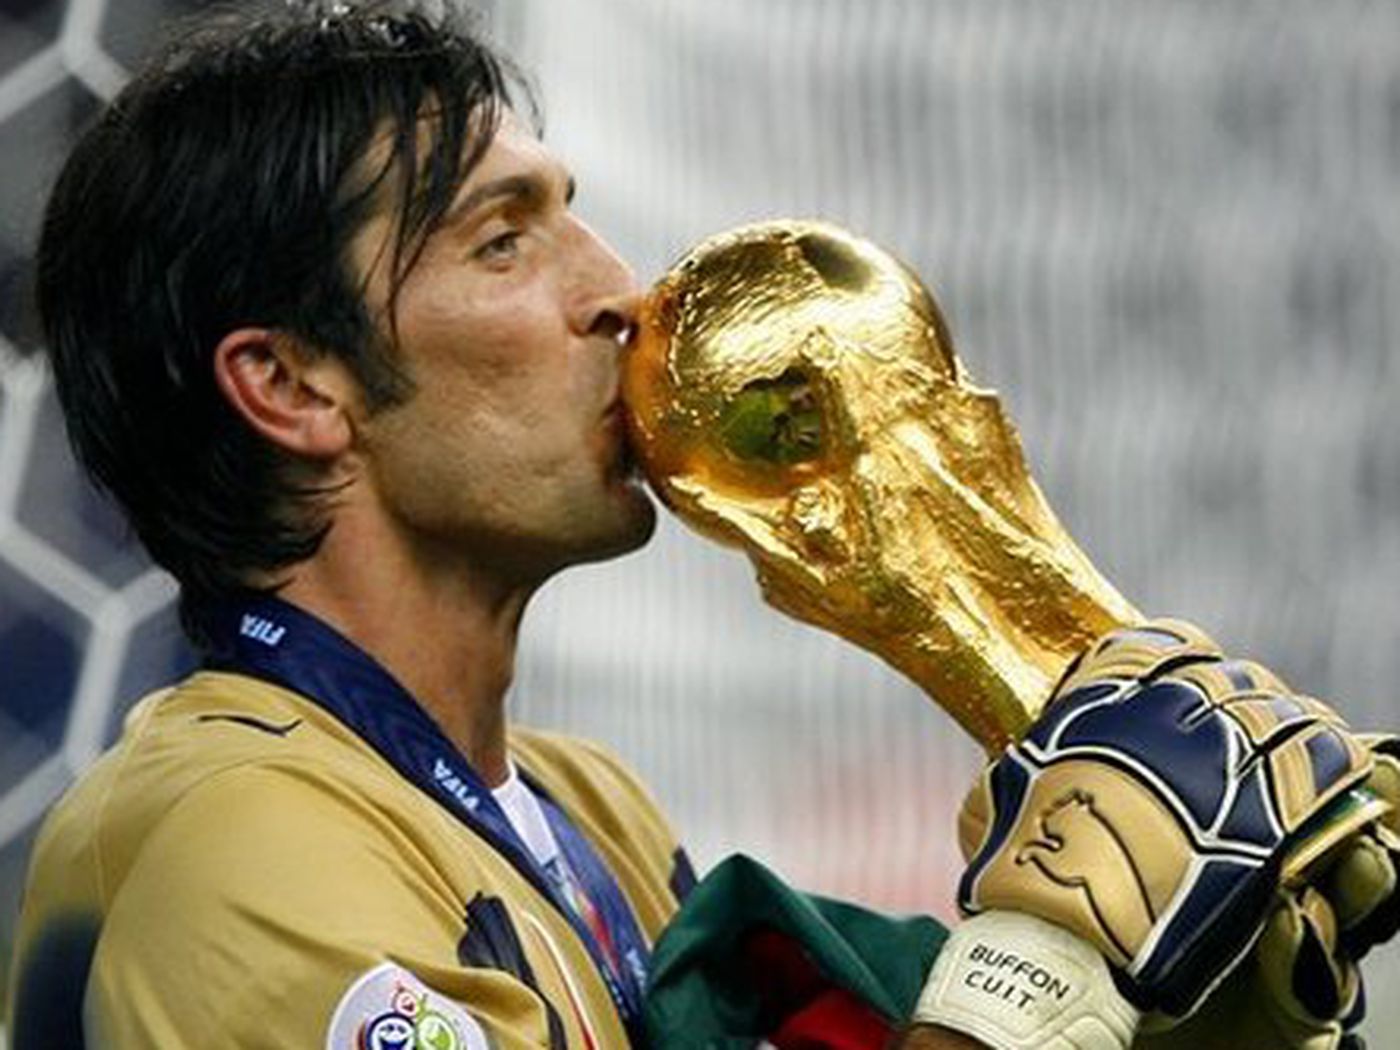 Gianluigi Buffon kisses the World Cup trophy after winning it with Italy in Germany in 2006